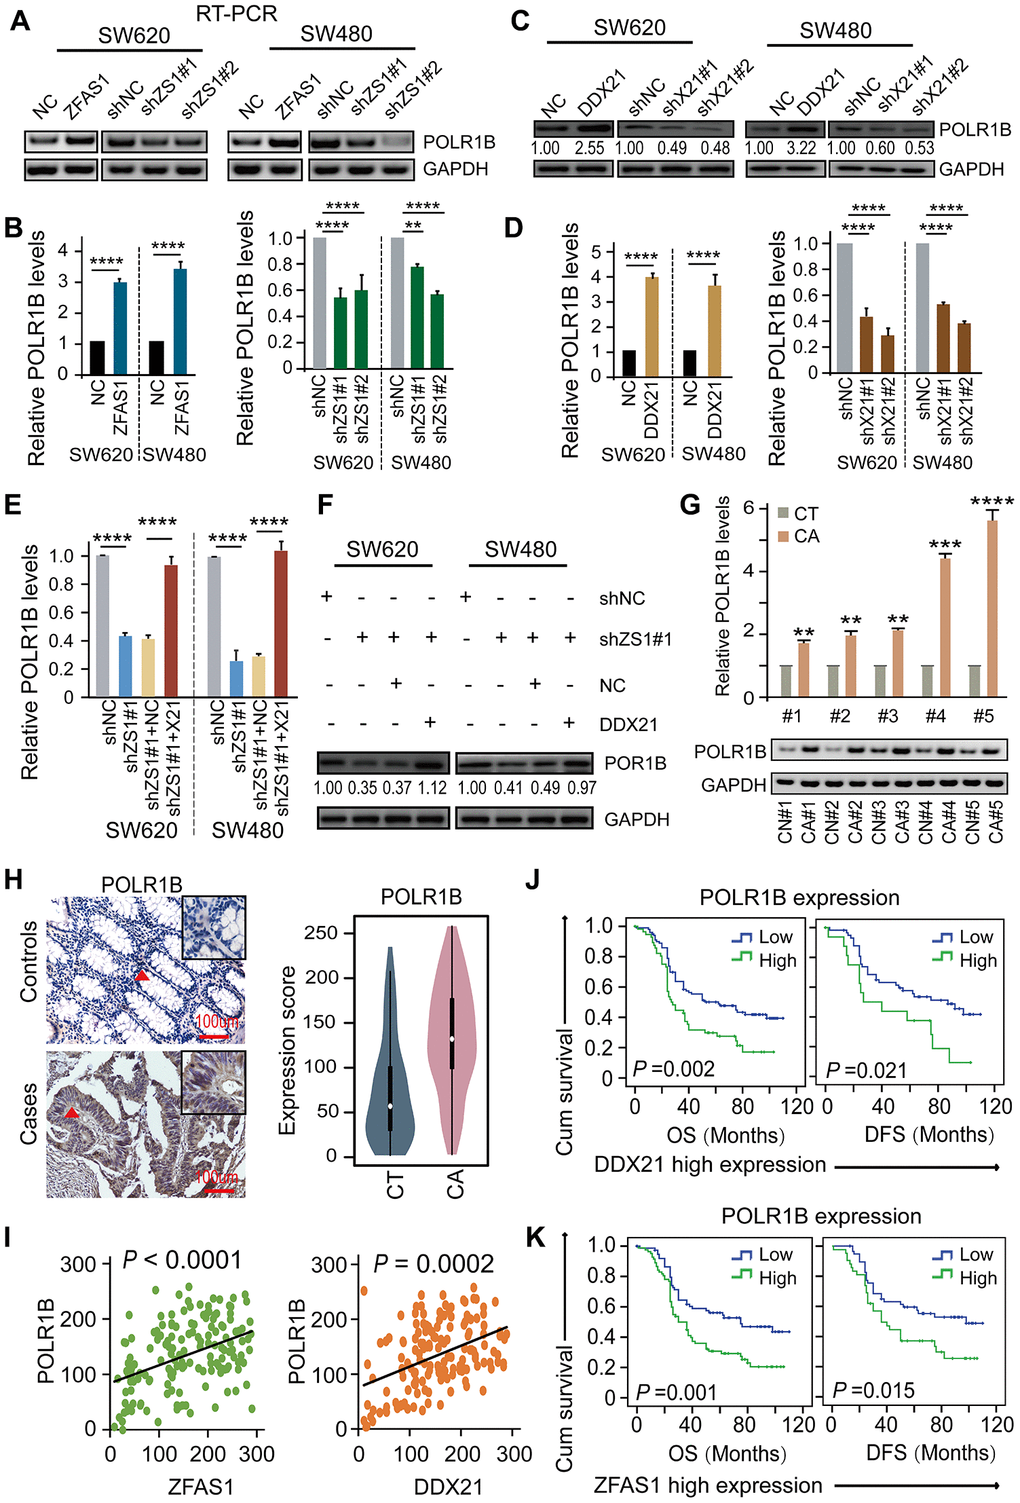 DDX21-PLOR1B signaling axis regulated by lncRNA ZFAS1 in CRC cells and tissues. (A and B) The mRNA expression of POLR1B after overexpression or silencing lncRNA ZFAS1 in SW620 and SW480 cells by RT-PCR (A) and qPCR assay (B). (C and D) The expression levels of POLR1B after interfering DDX21 expression in both SW620 and SW480 cells detected by western blot (C) and qPCR assay (D). (E and F) Rescue experiments determining the POLR1B mRNA and protein expression levels treated by silencing of lncRNA ZFAS1 and overexpression of DDX21 in SW620 and SW480 cells assayed by qPCR assay (E) and western blot assay (F). (G) Representative analysis results of POLR1B expression in paired CRC tissues and controls assayed by RT-PCR and qPCR method. 5 representative data was shown. (H) Representative IHC imagines and Violin charts displaying the POLR1B protein expression based on the CRC patient tissues and matched tumor-adjacent controls (n = 157). The bar represents 100μm. (I) Linear regression analysis illustrating a positive correlation between the expression of POLR1B and LncRNA ZFAS1 or DDX21. (J and K) Stratified Kaplan-Meier plot illustrating the impact of POLR1B high/low expression on the DFS and OS upon those patients with DDX21 high expression (J) or with ZFAS1 high expression (K). Data were shown as mean ± s.d. Two-tailed Student’s t-tests were used. *P P P P 